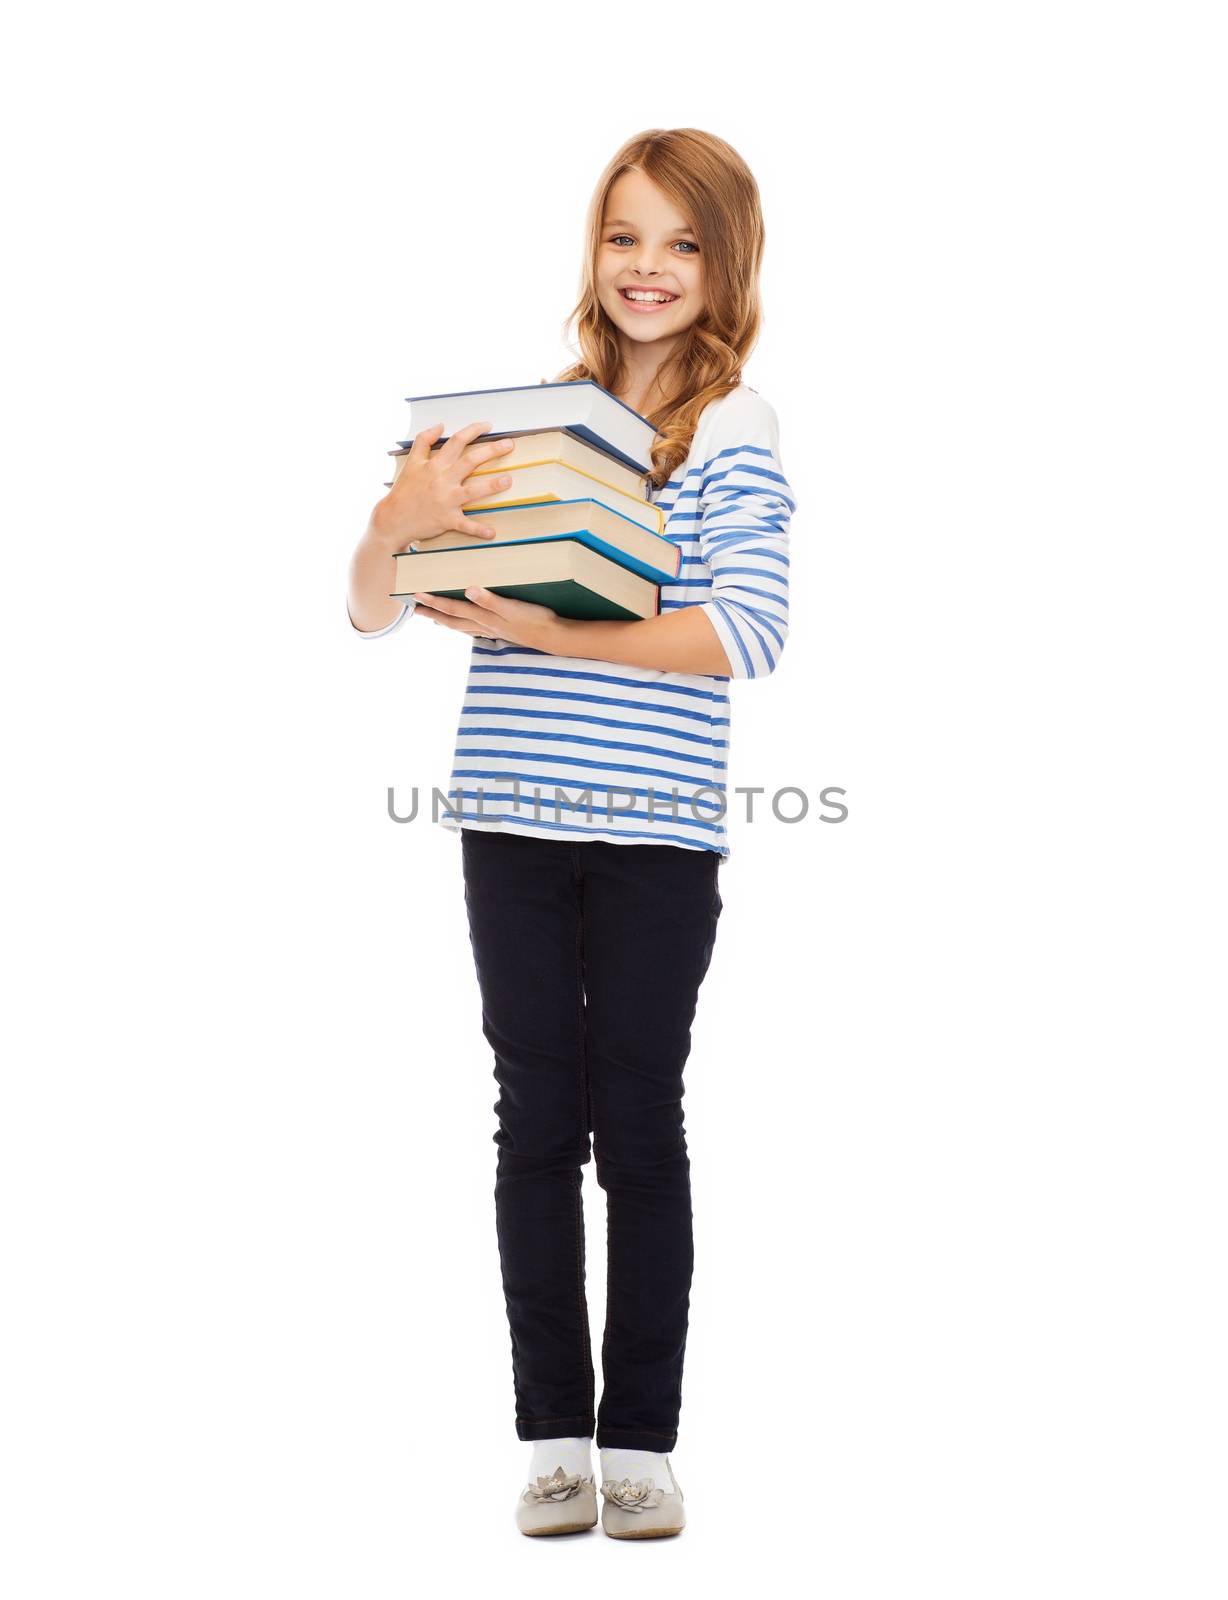 little student girl with many books by dolgachov